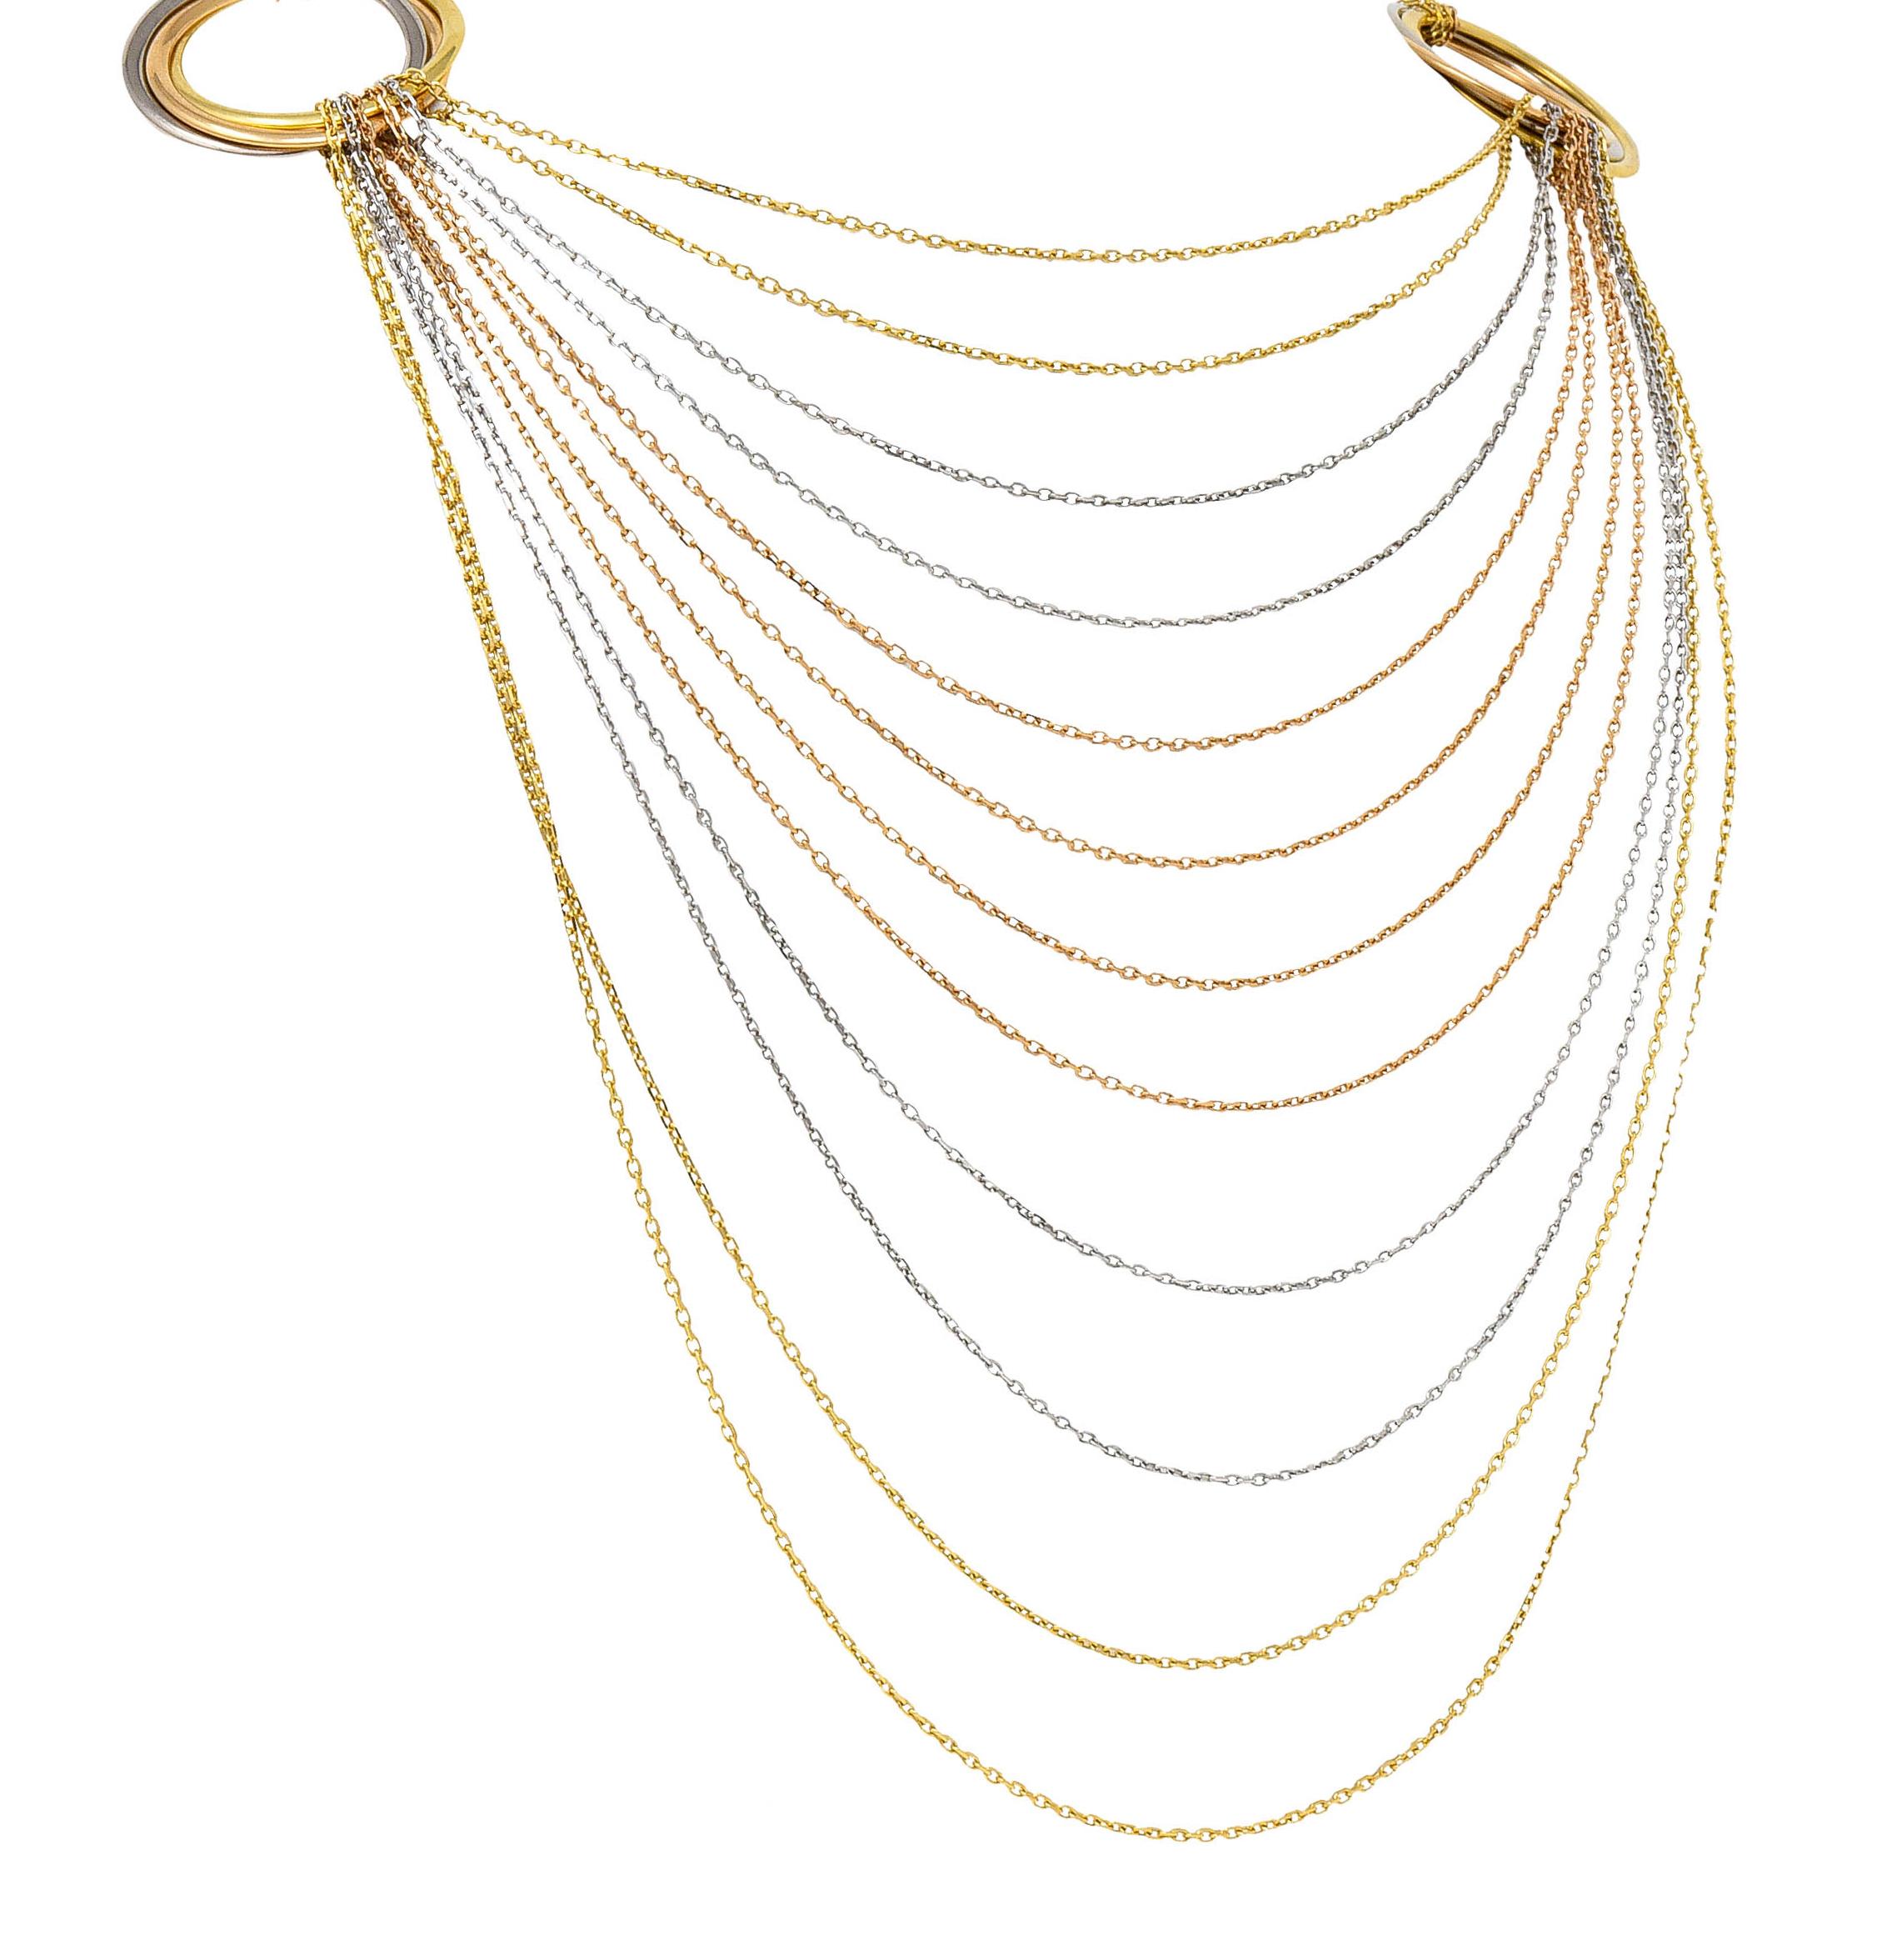 Contemporary Cartier 18 Karat Tri-Colored Rose Yellow White Gold Trinity Strand Necklace